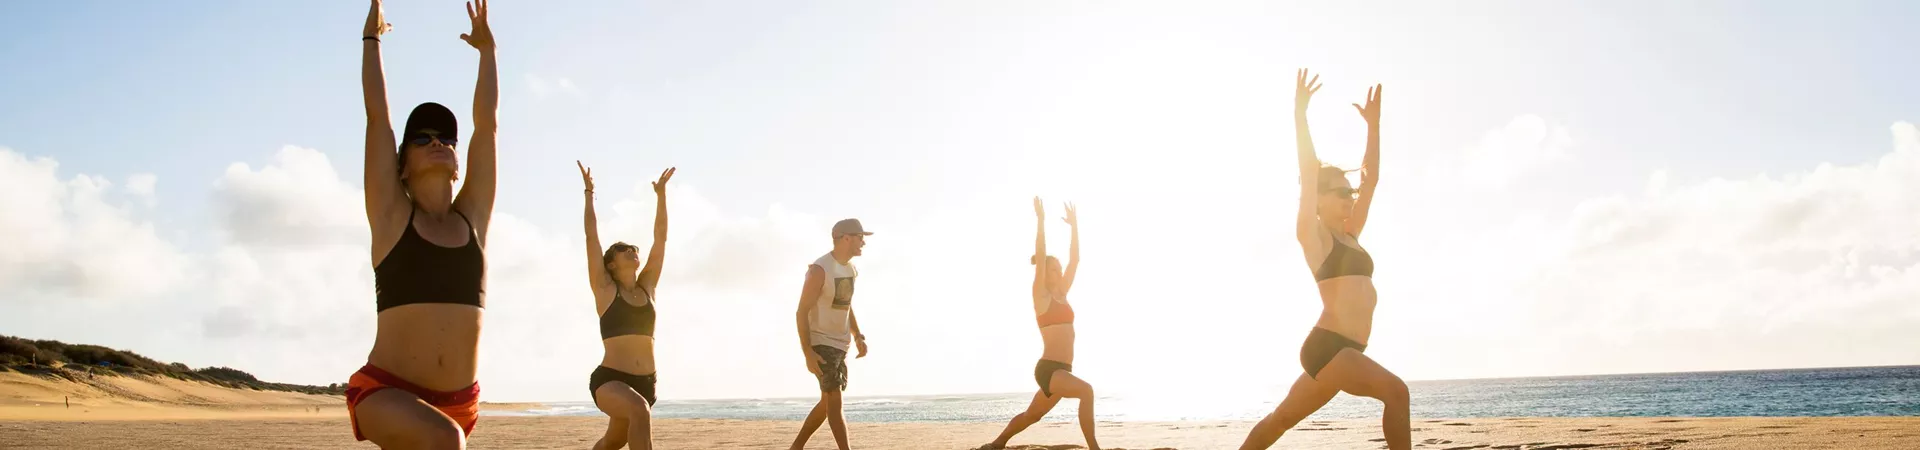 Friends doing yoga in the sand